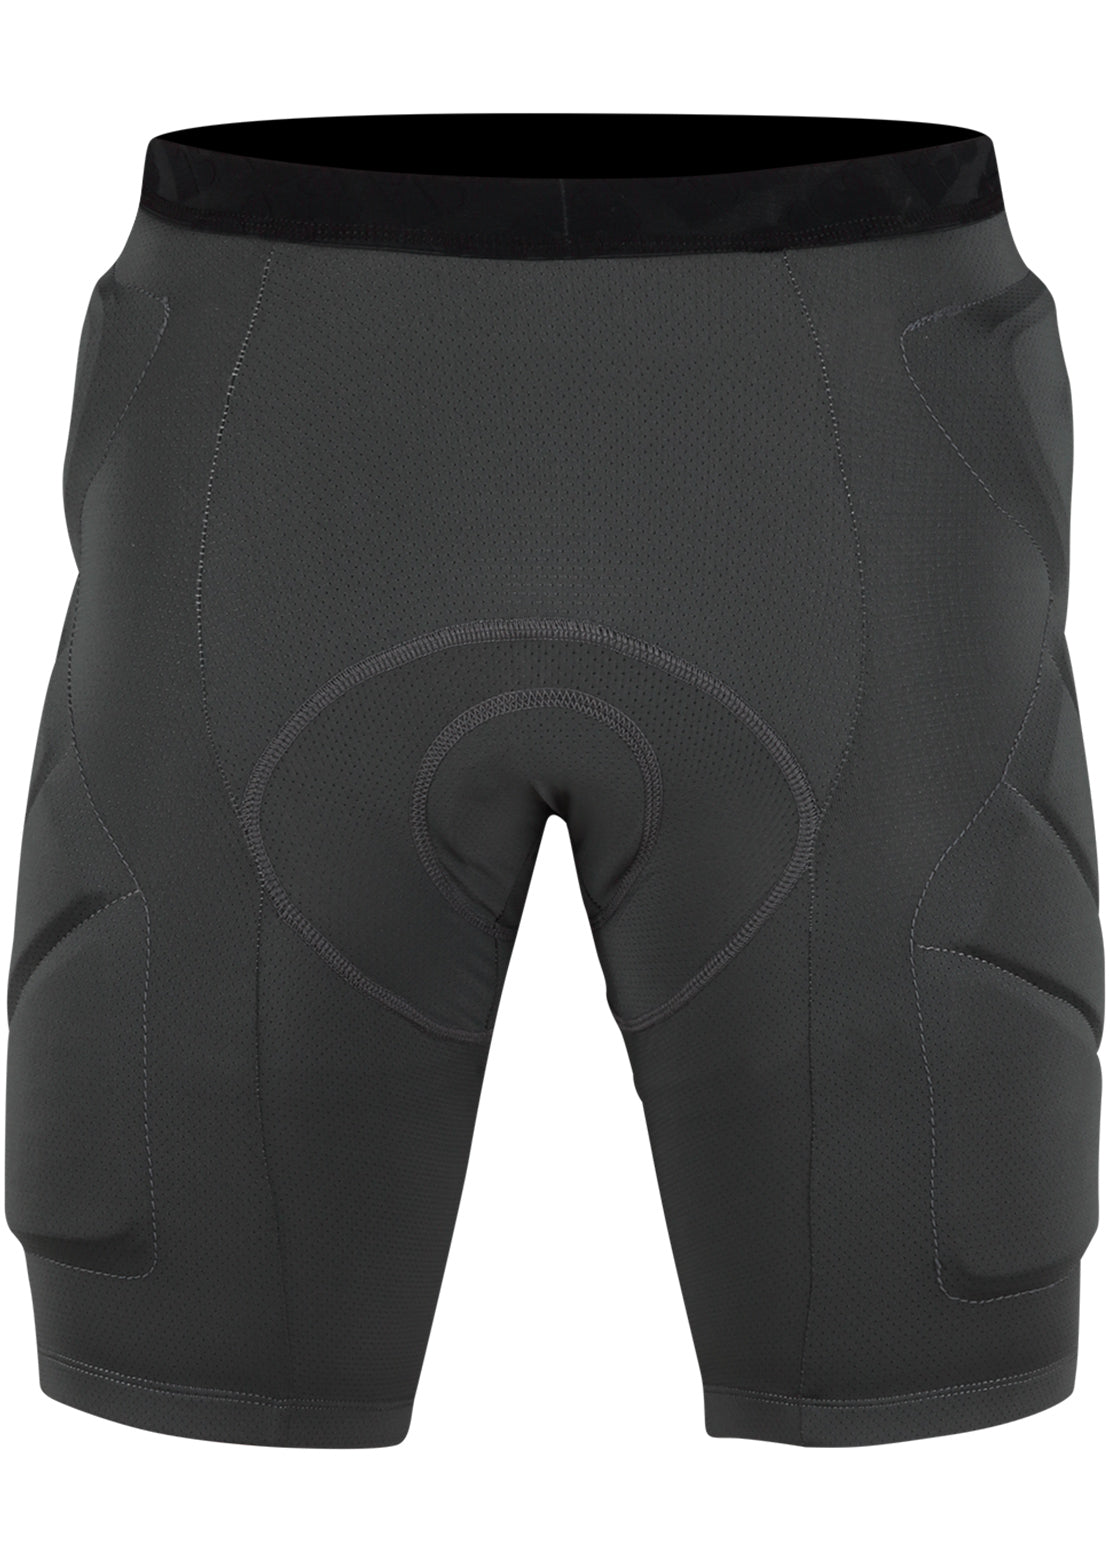 IXS Trigger Lower Body Protective Bike Shorts Anthracite